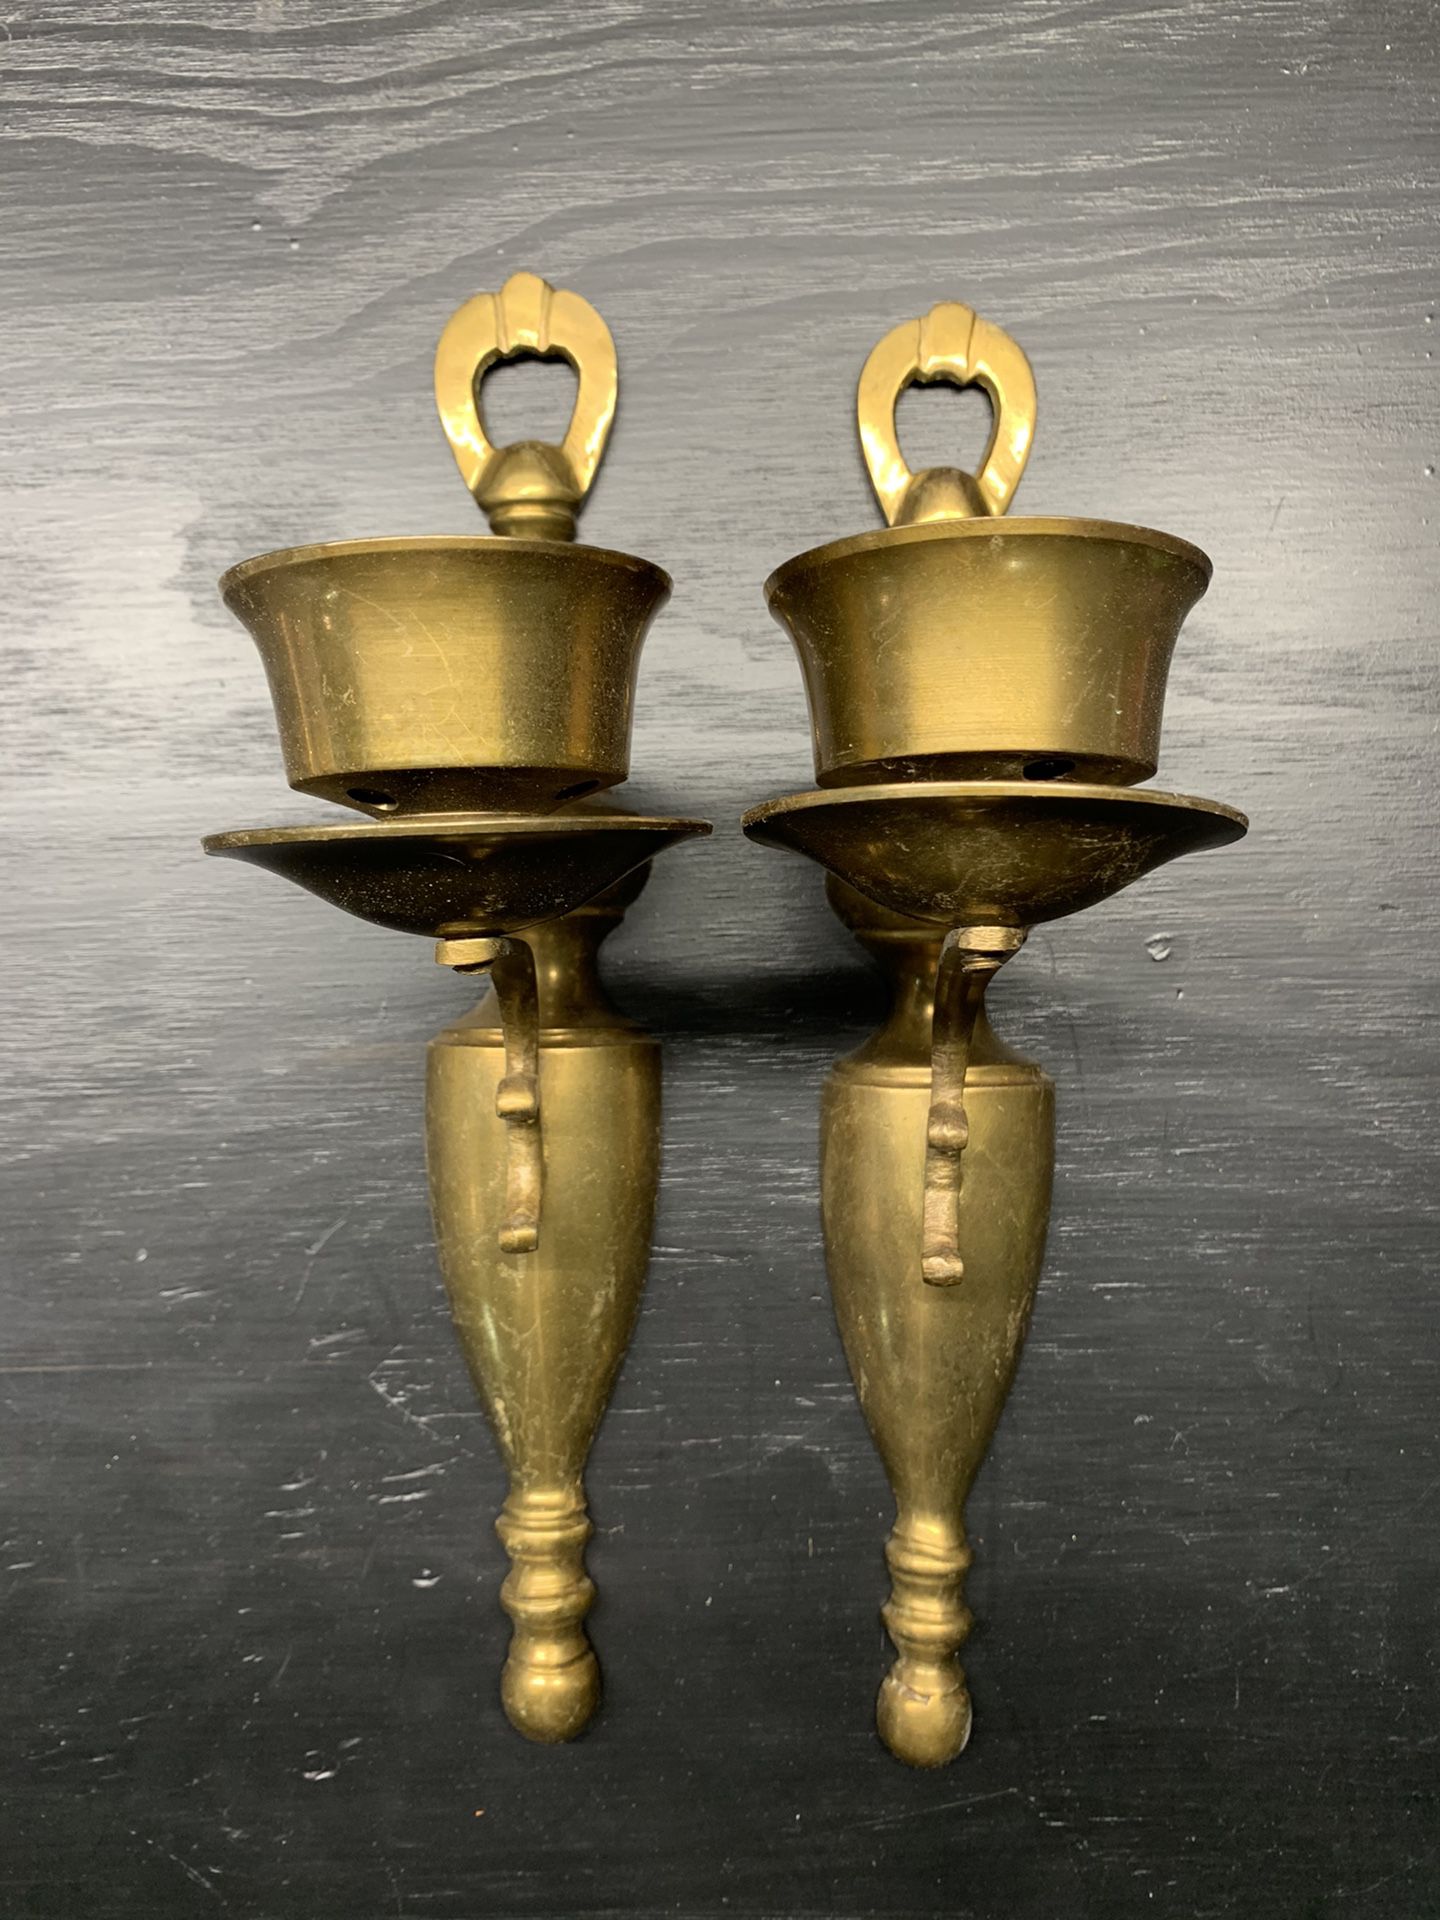 2 Brass sconce wall candle holder